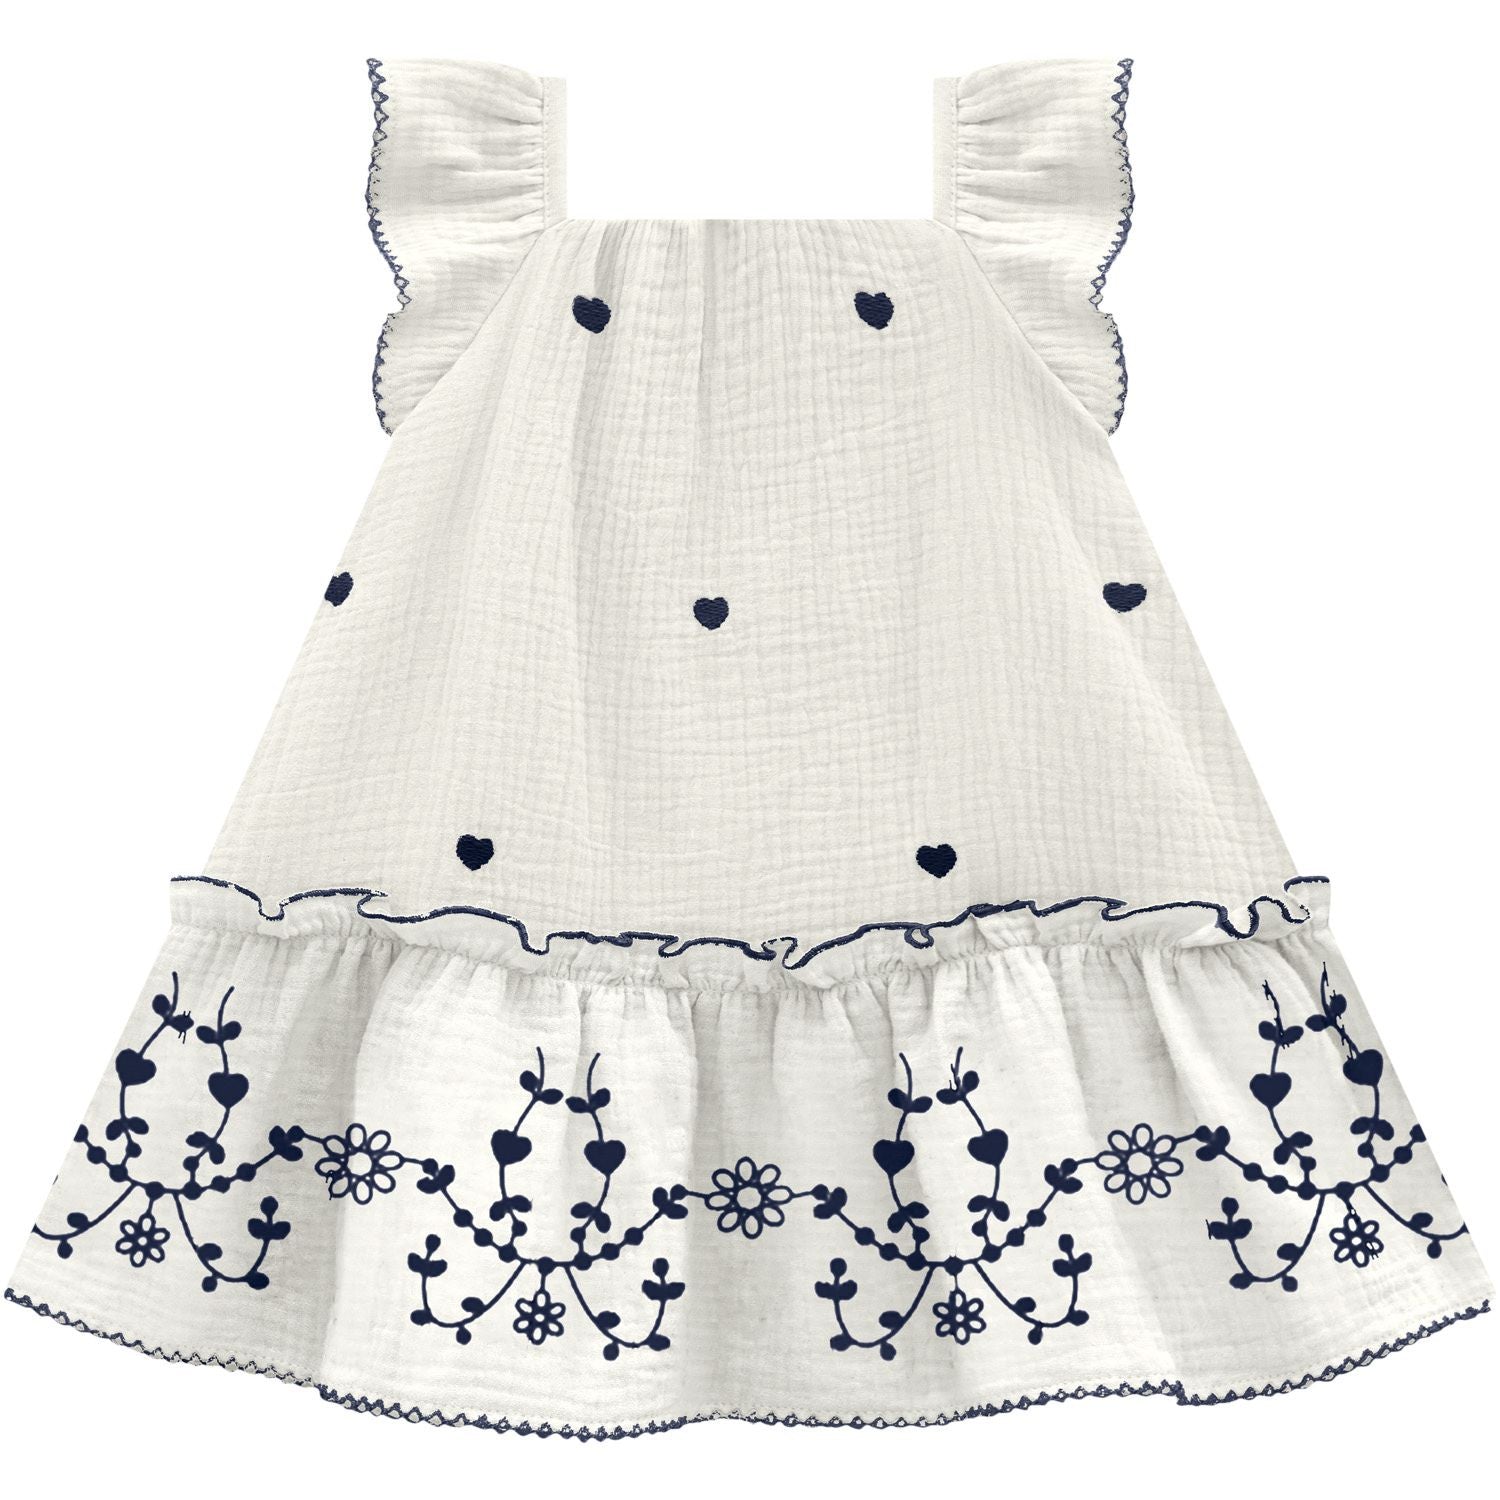 Girl’s Embroidered White and Blue Dress